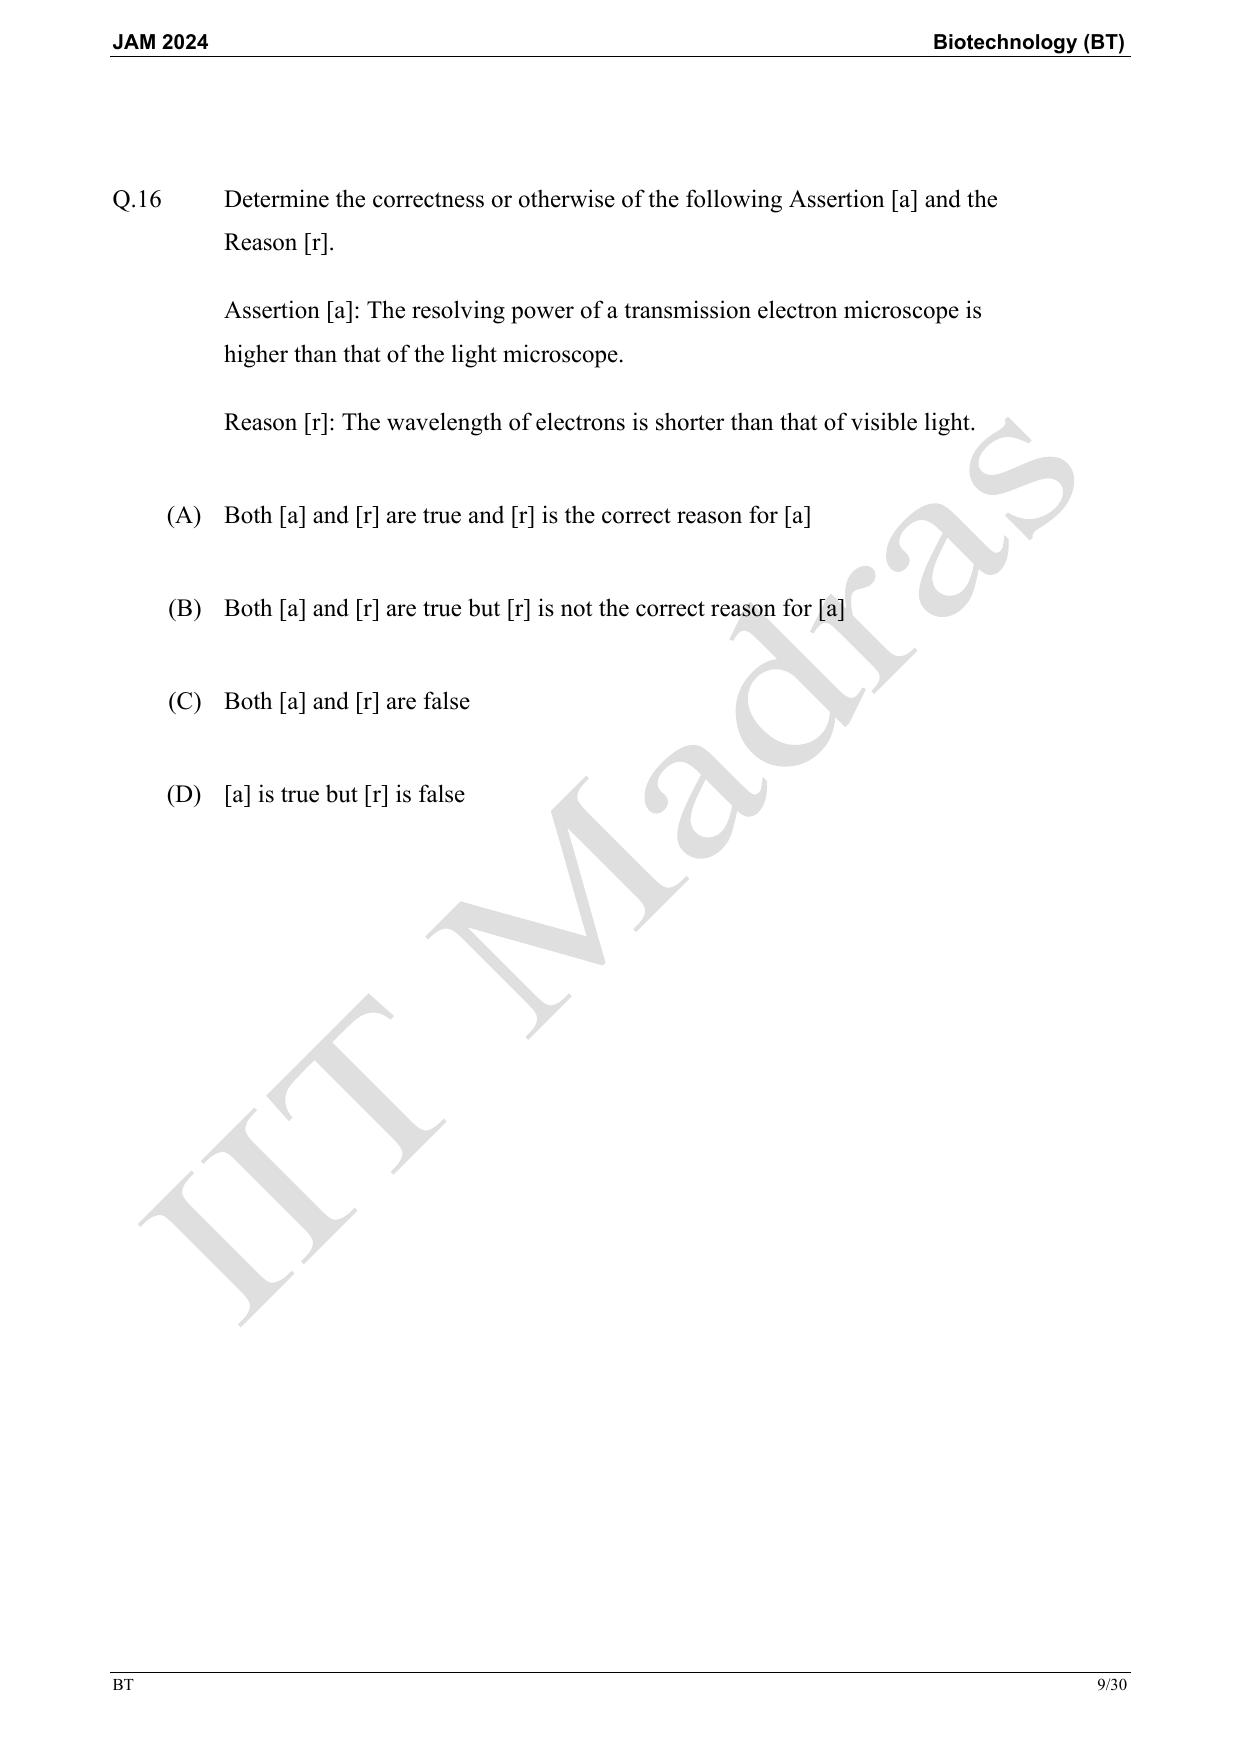 IIT JAM 2024 Biotechnology (BT) Master Question Paper - Page 9